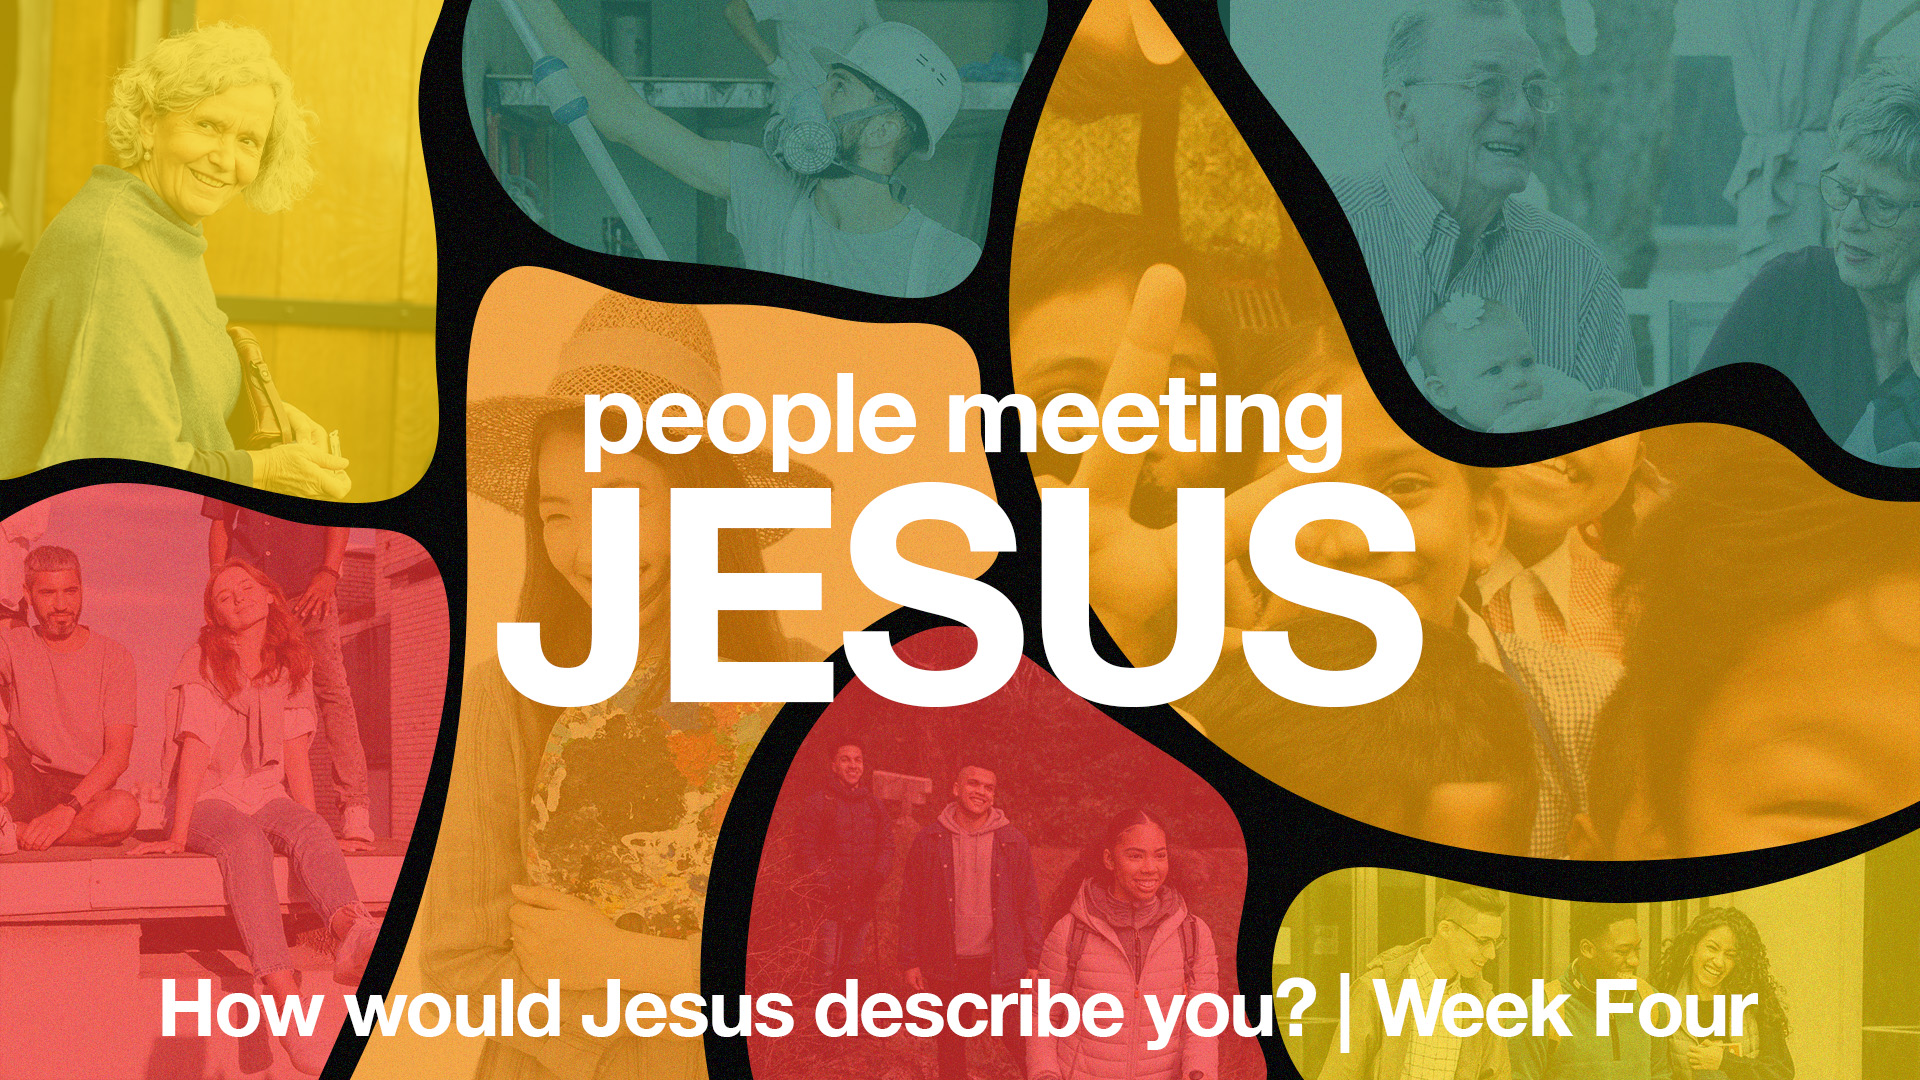 How would Jesus describe you? - Week Four